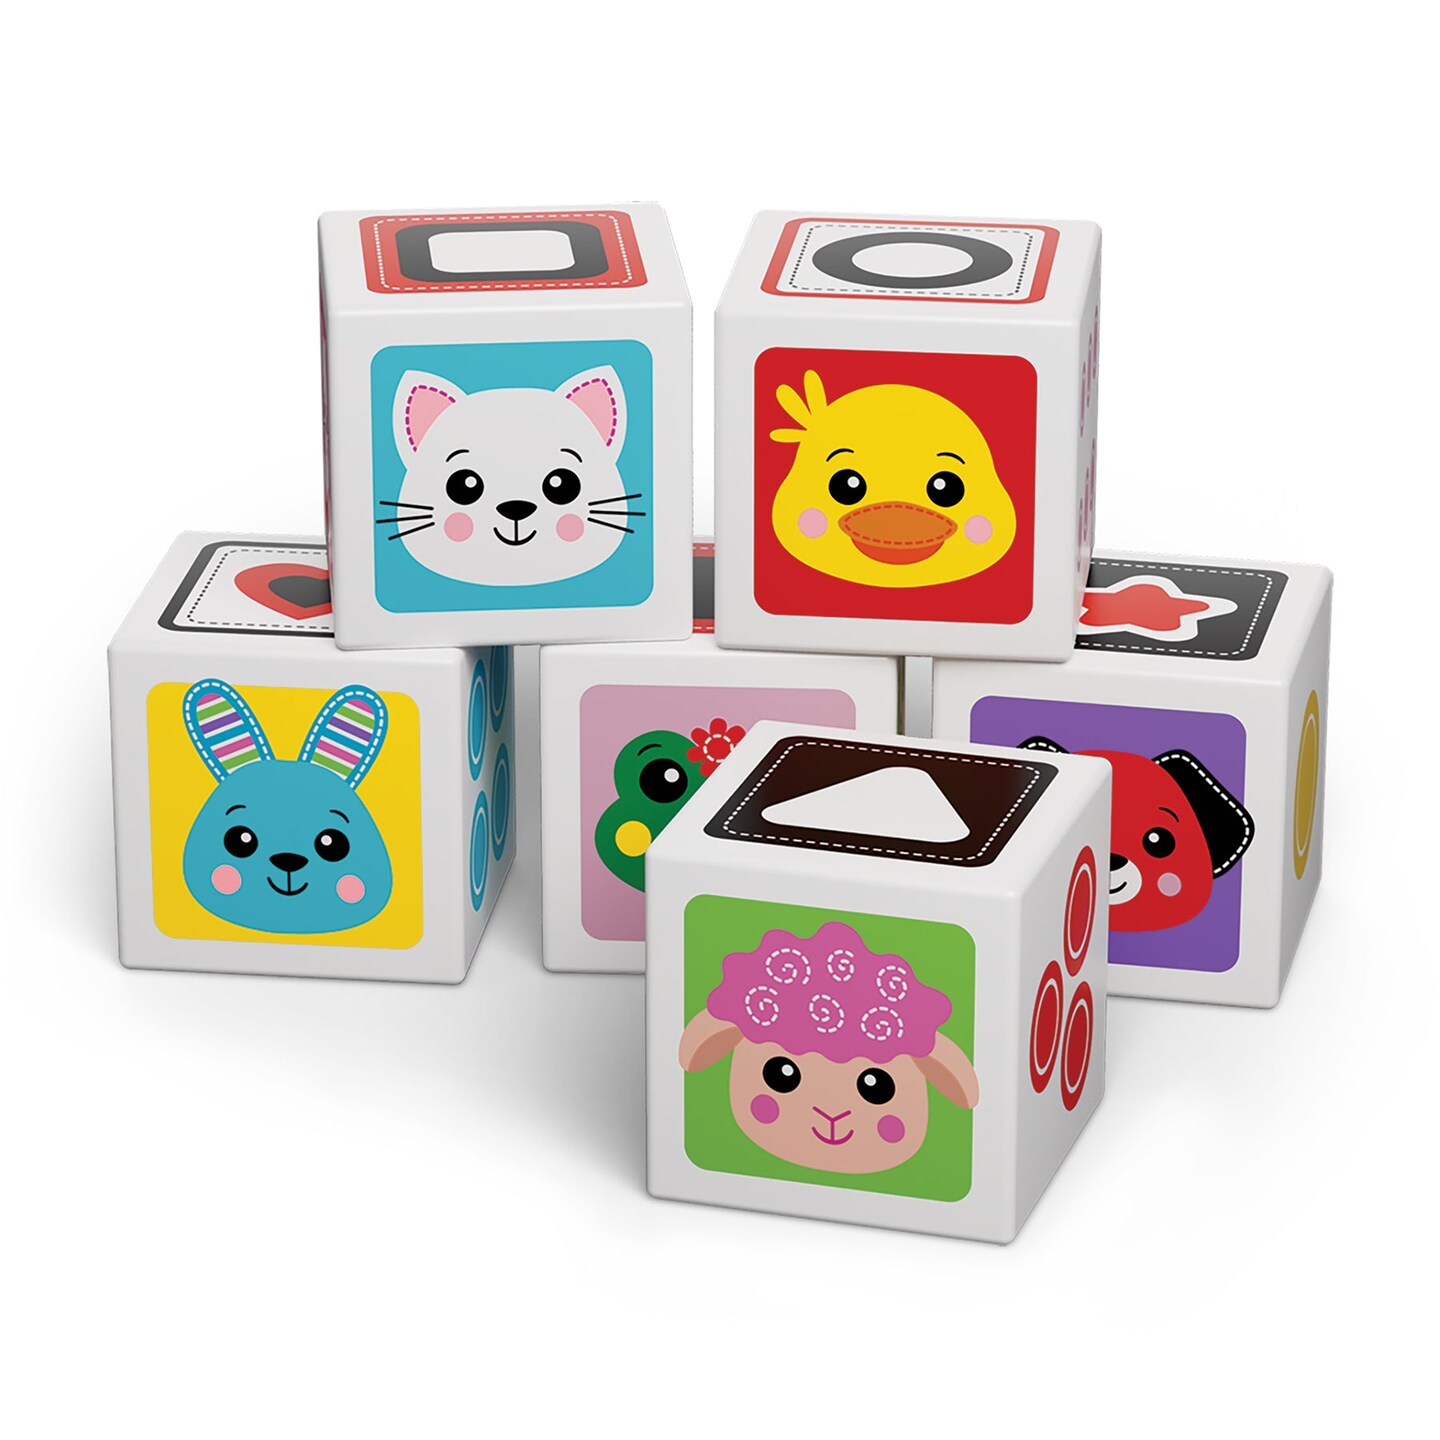 Kids Hits: My First Wooden Cubes - Stack, Match, and Explore with Six Cute Animals, Numbers, and Shapes &#x2013; 100% Eco-Friendly Fun